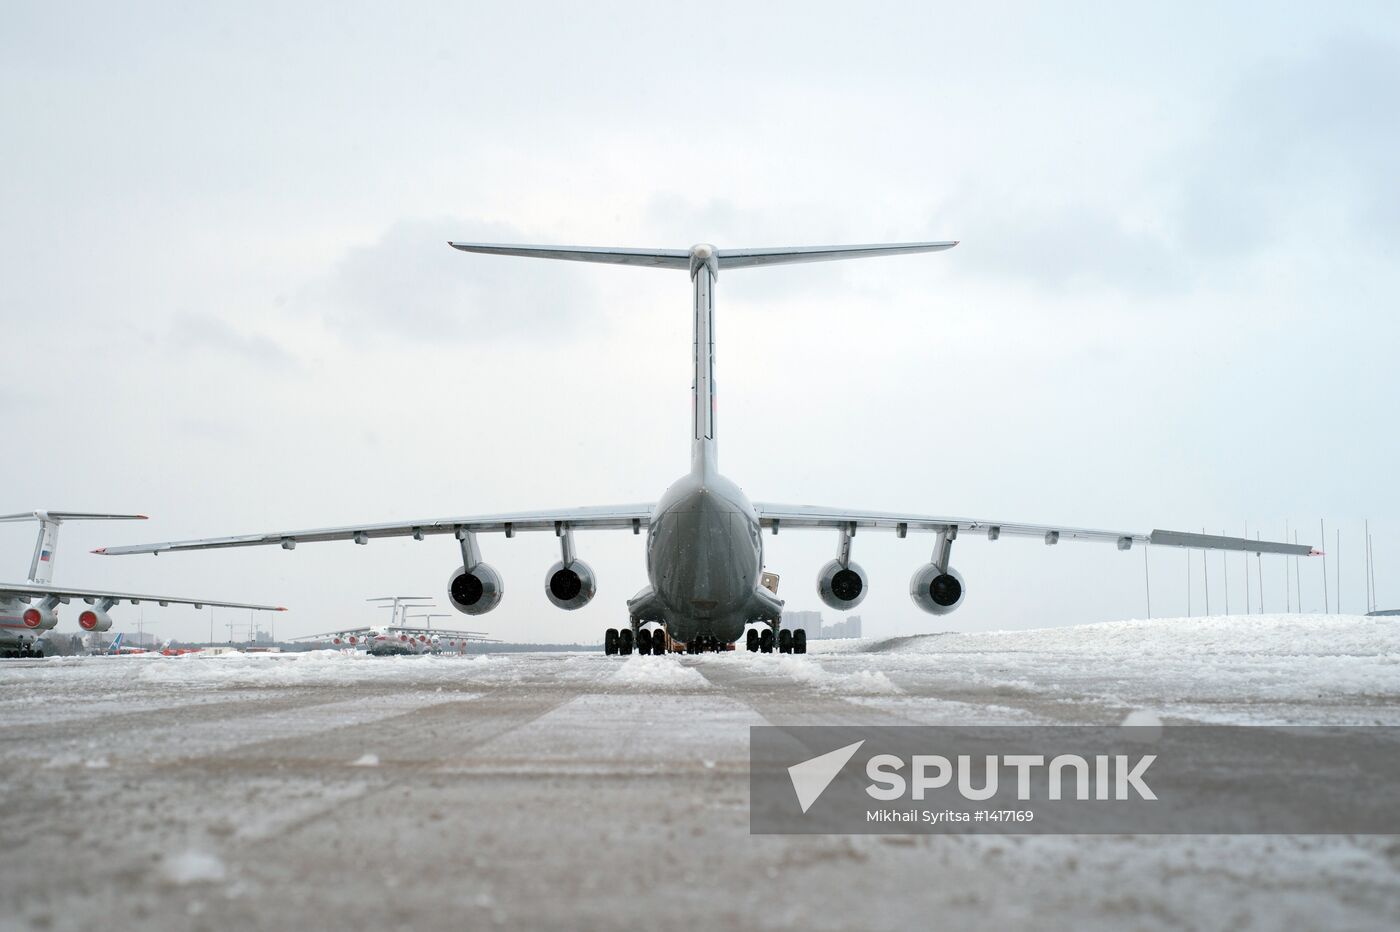 Testing of Il-76MD-90A military transport aircraft